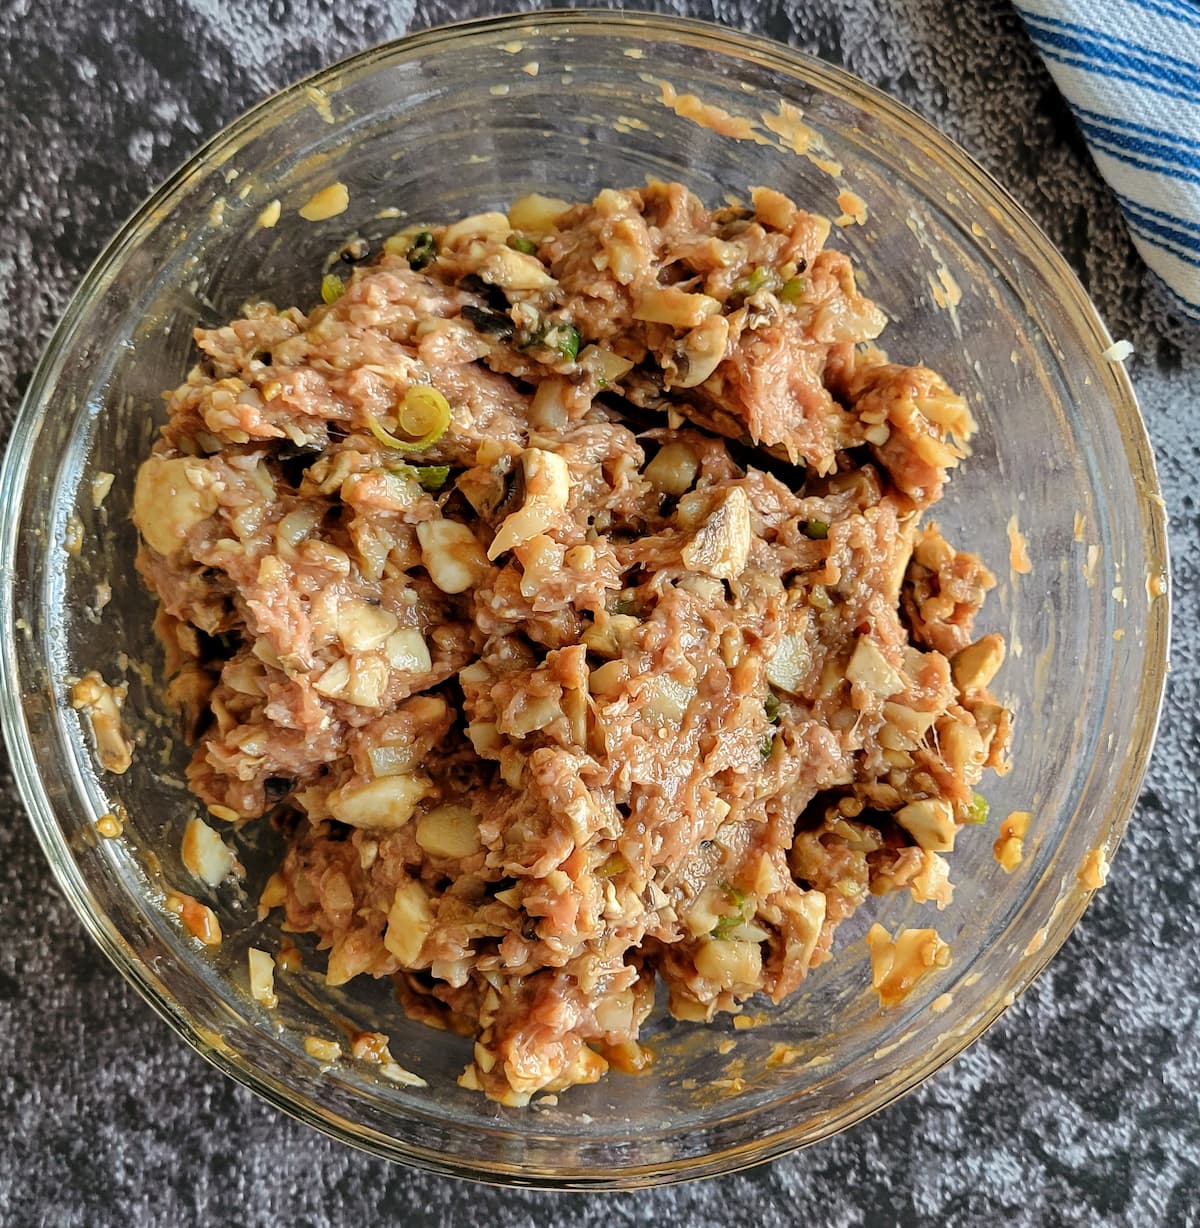 raw ground chicken mixed with chopped green onions and other ingredients in a bowl